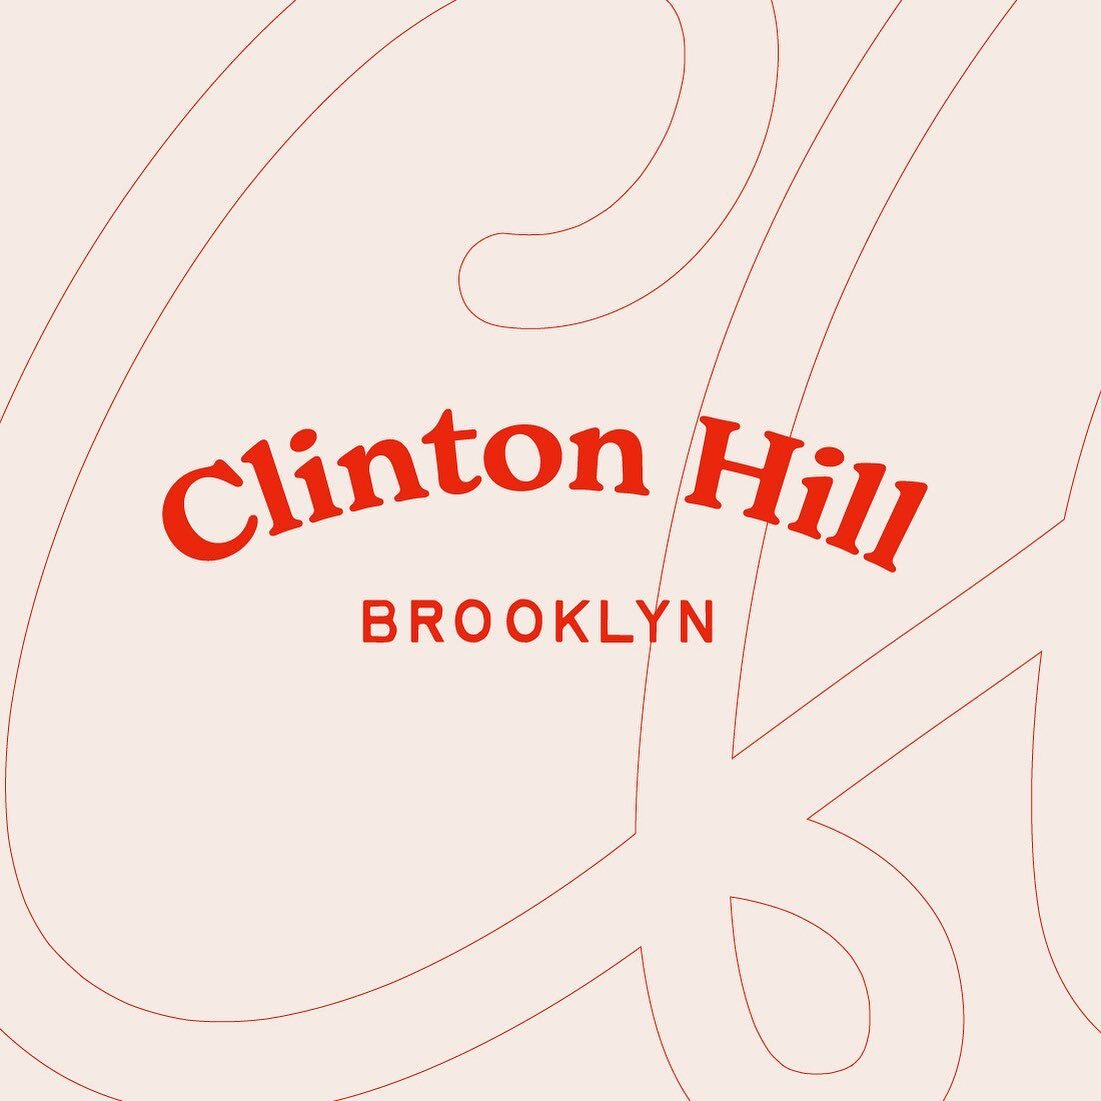 Question: Where in Brooklyn can you get to either Lower Manhattan or Williamsburg in just 20 minutes? Answer: The beautiful and inspiring Clinton Hill, which NYC's public transit system serves incredibly well! Thanks to their prime location, Clinton 